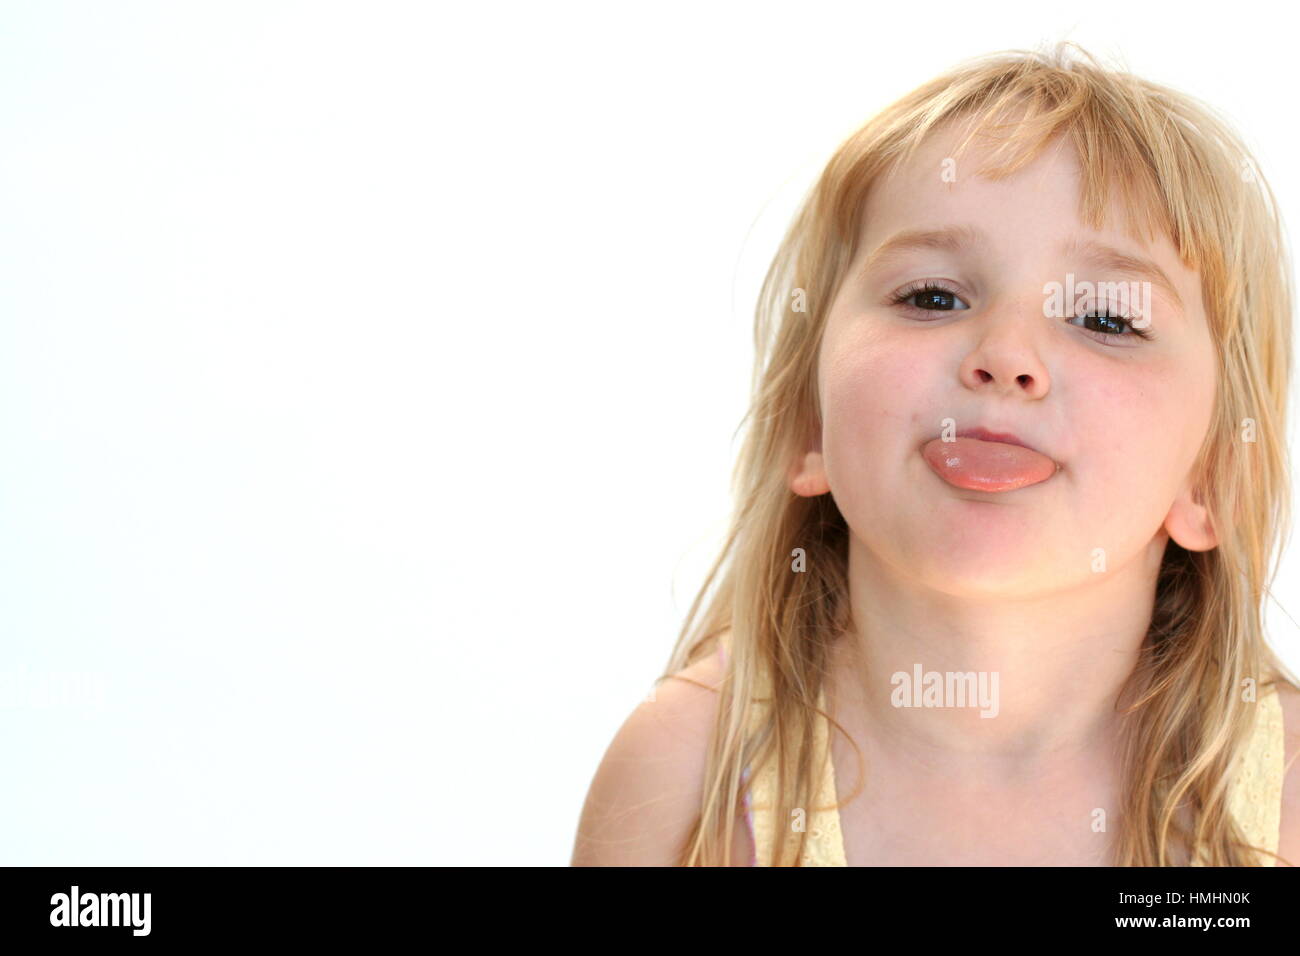 young girl kid blonde child making a funny face sticking tongue out having fun Stock Photo